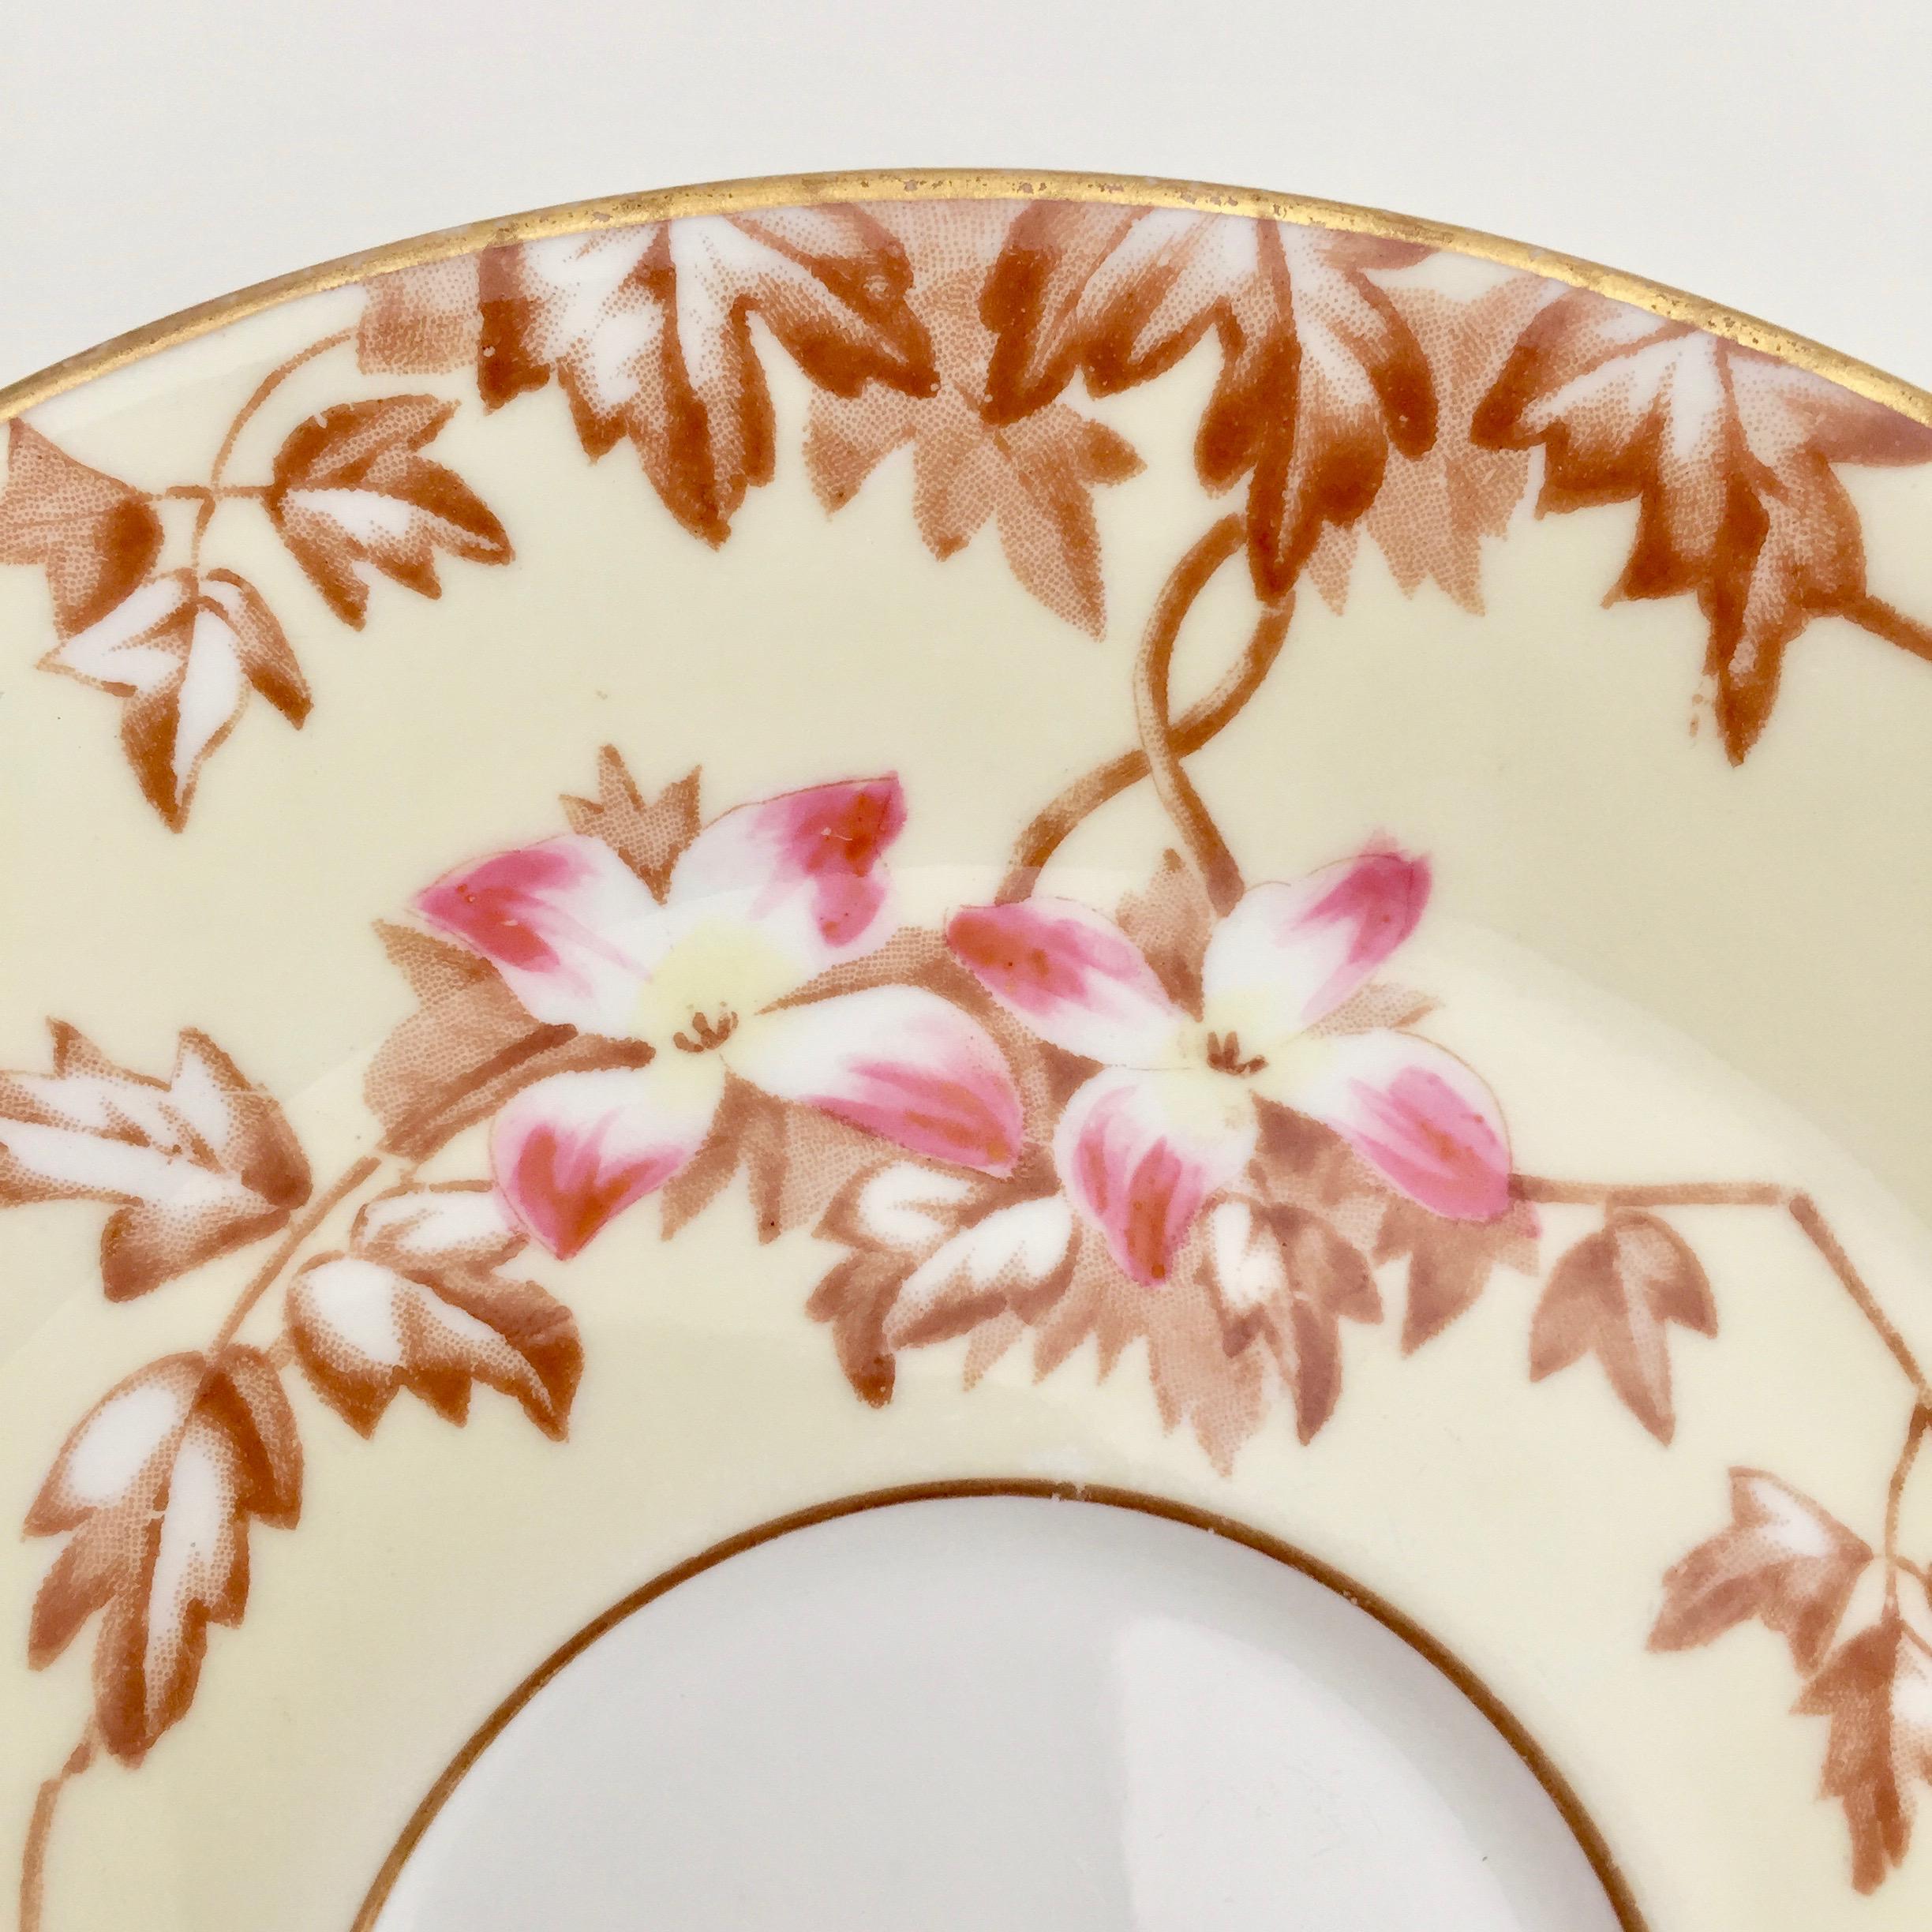 English EJD Bodley Teacup with Pink Japanese Blossoms, Aesthetic Movement, circa 1885